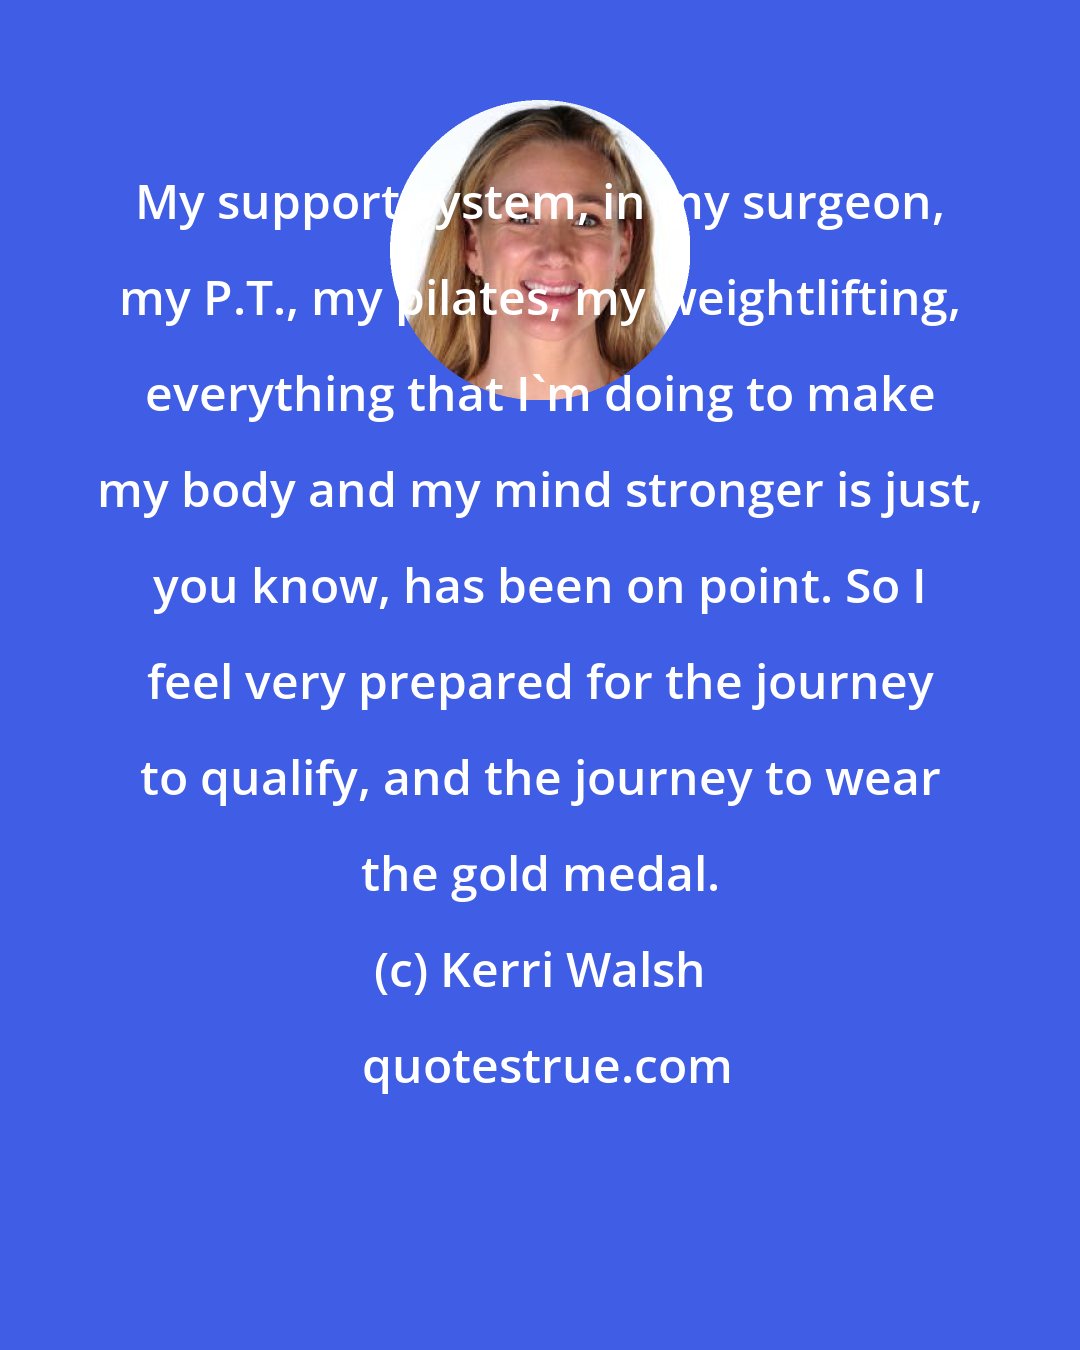 Kerri Walsh: My support system, in my surgeon, my P.T., my pilates, my weightlifting, everything that I'm doing to make my body and my mind stronger is just, you know, has been on point. So I feel very prepared for the journey to qualify, and the journey to wear the gold medal.